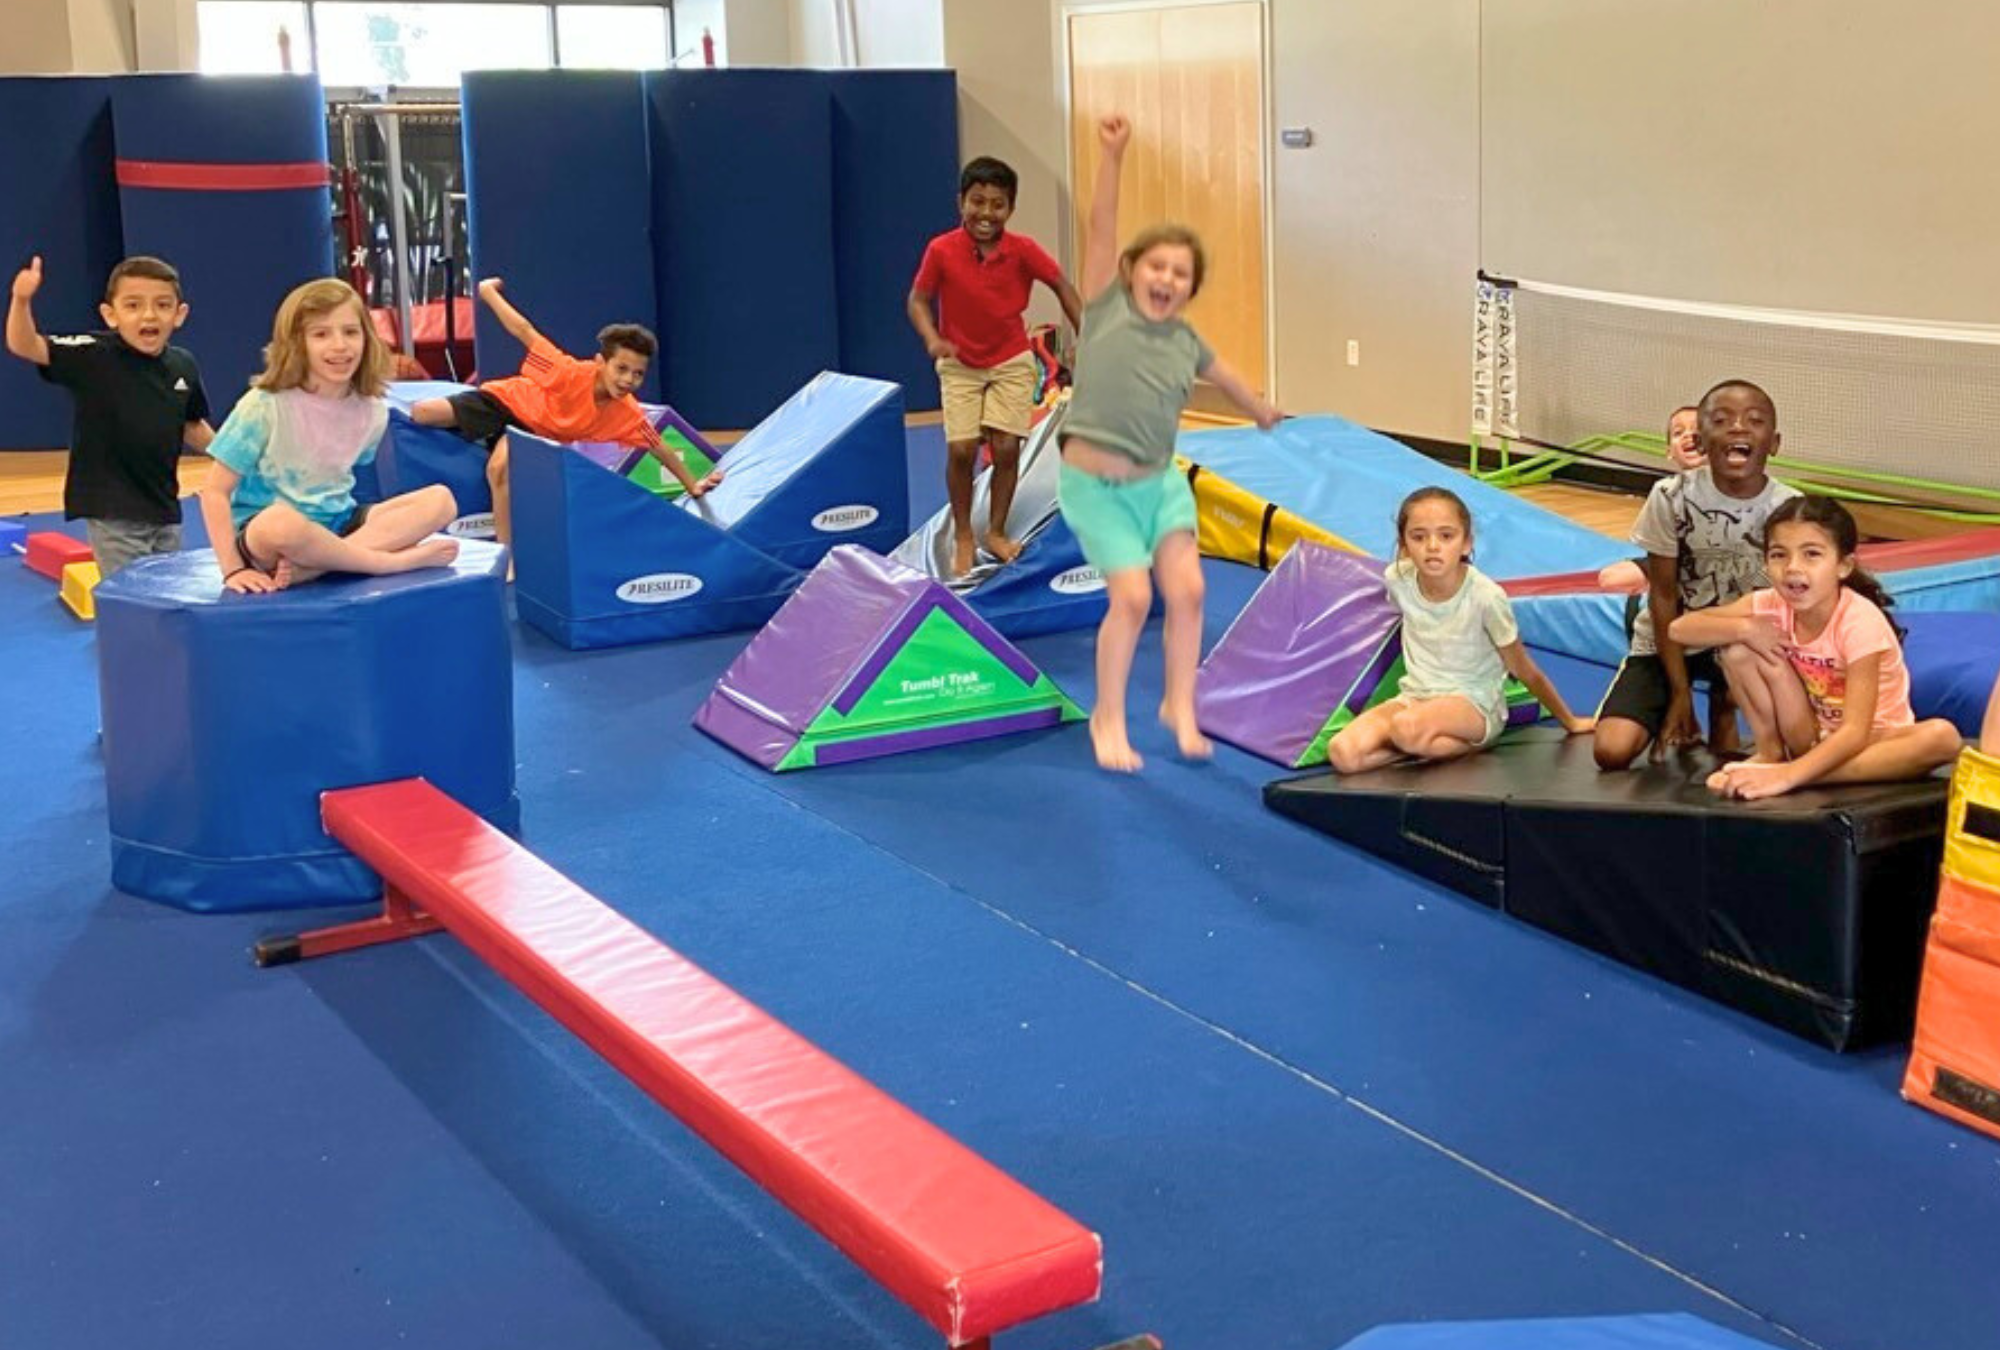 Campers pose on the ninja course in the gym